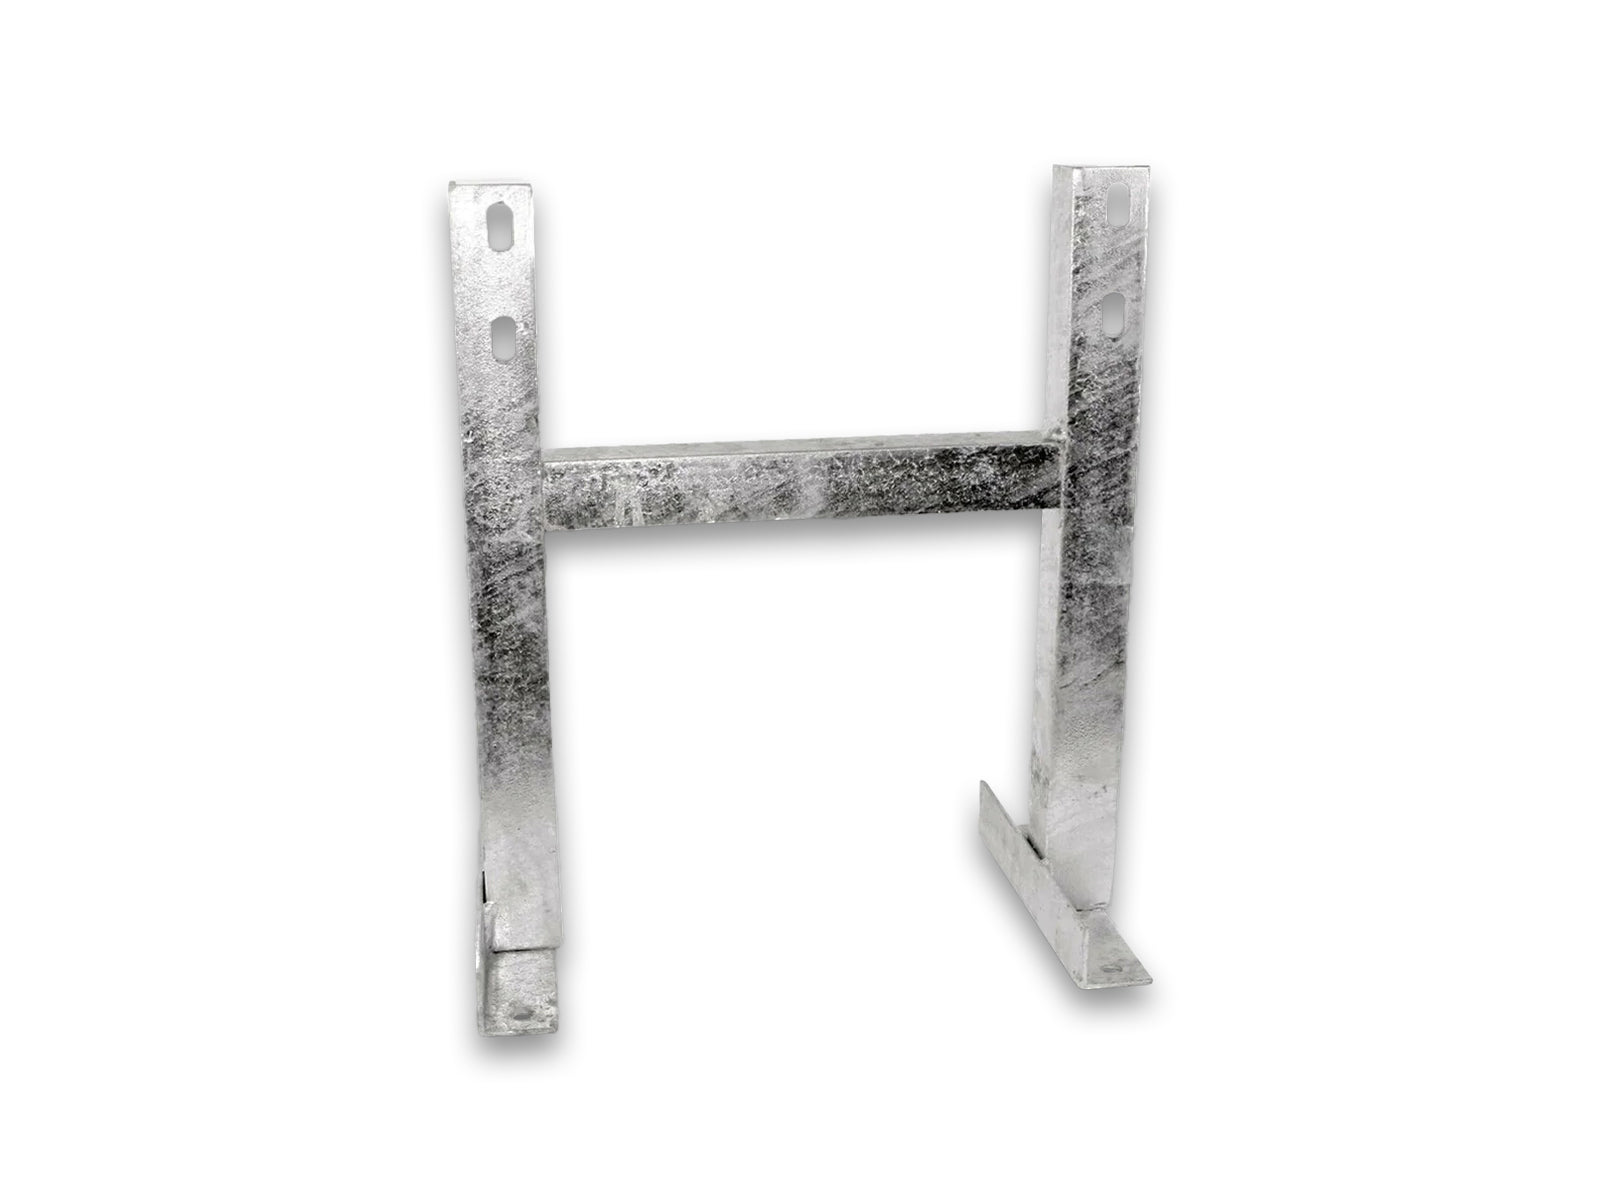 Galvanised-H-wall-bracket-on-the-white-background